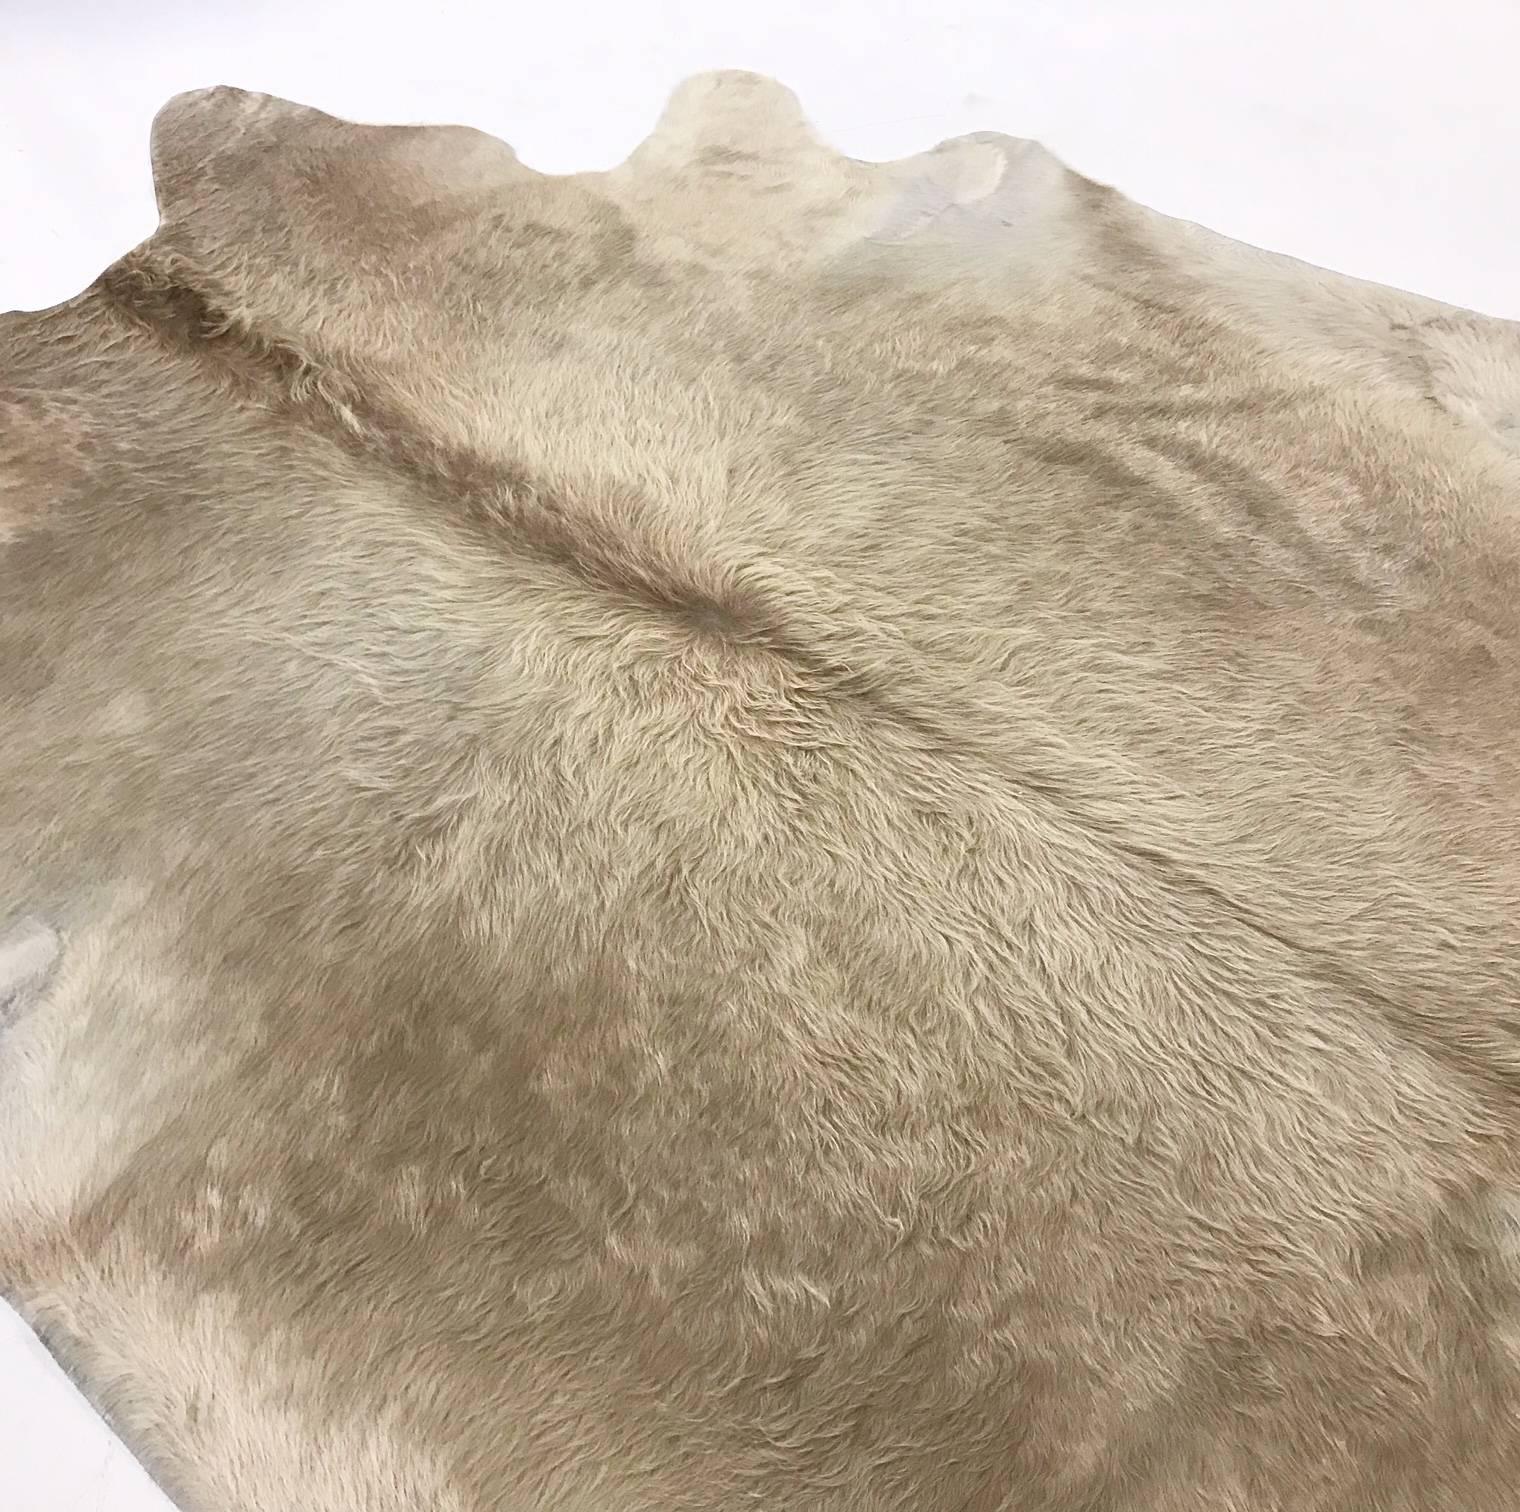 Cowhides are produced in many countries but it is universally known that the finest hair-on cowhides come from Brazil. Our cowhide rugs are produced in Brazil by one of the finest tanneries on earth. Using an expensive, time honoured tanning process